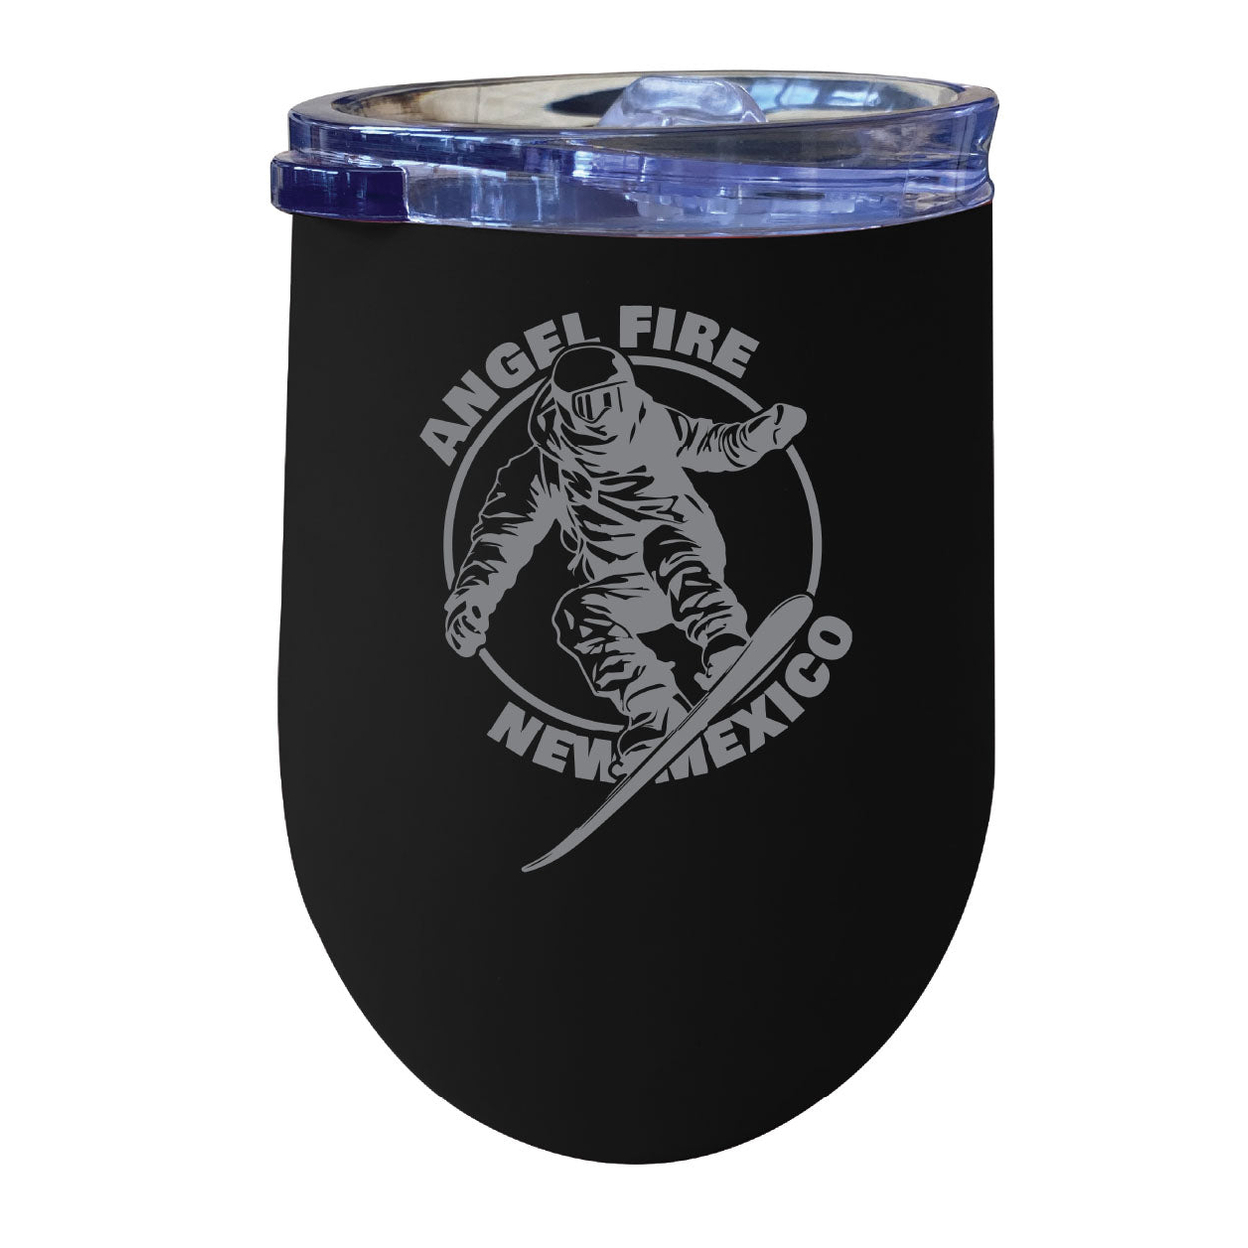 Angel Fire New Mexico Souvenir 12 Oz Engraved Insulated Wine Stainless Steel Tumbler - Black,,2-Pack